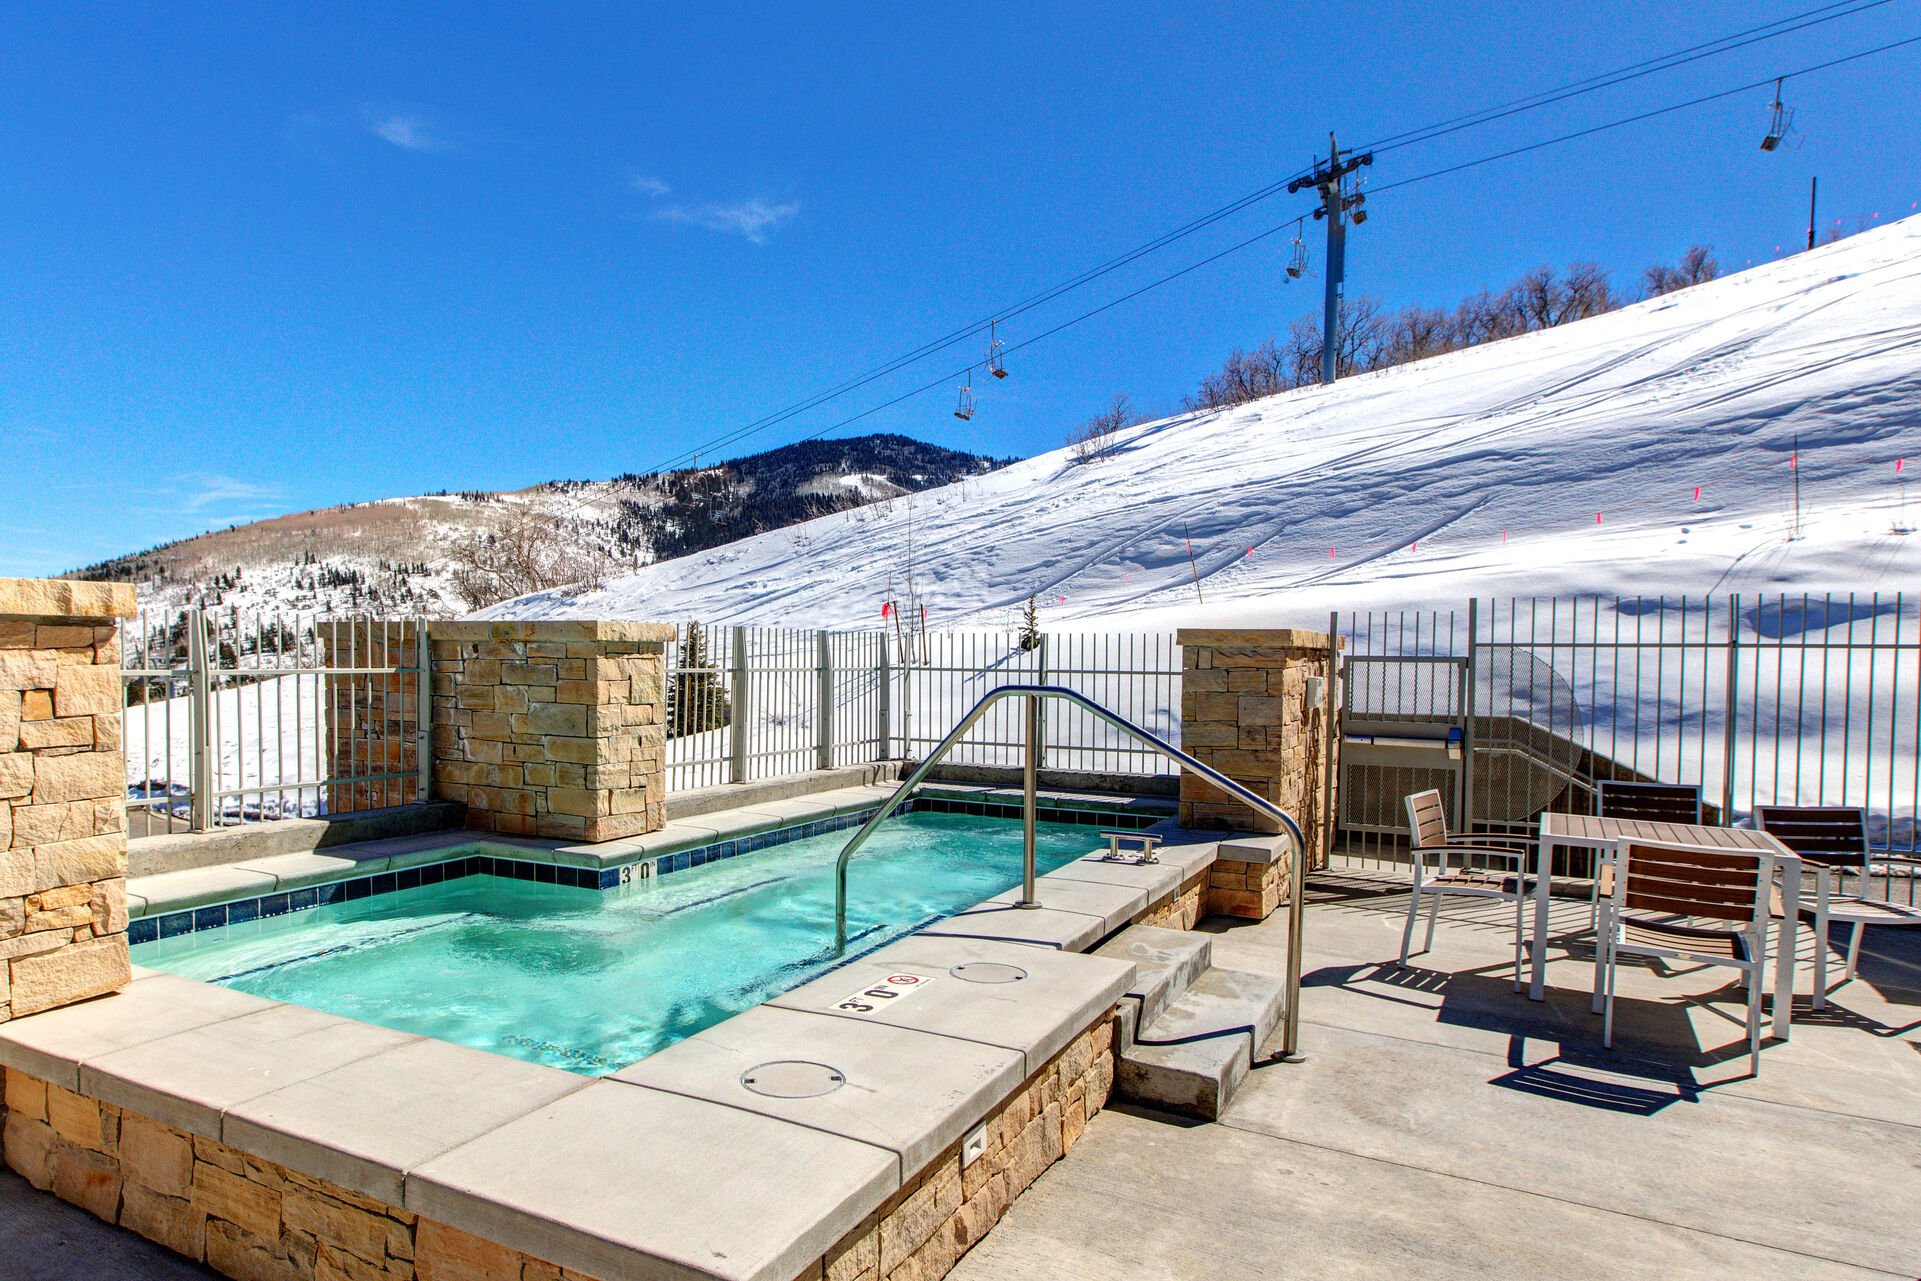 Slope-side Communal Heated Pool and Hot Tub